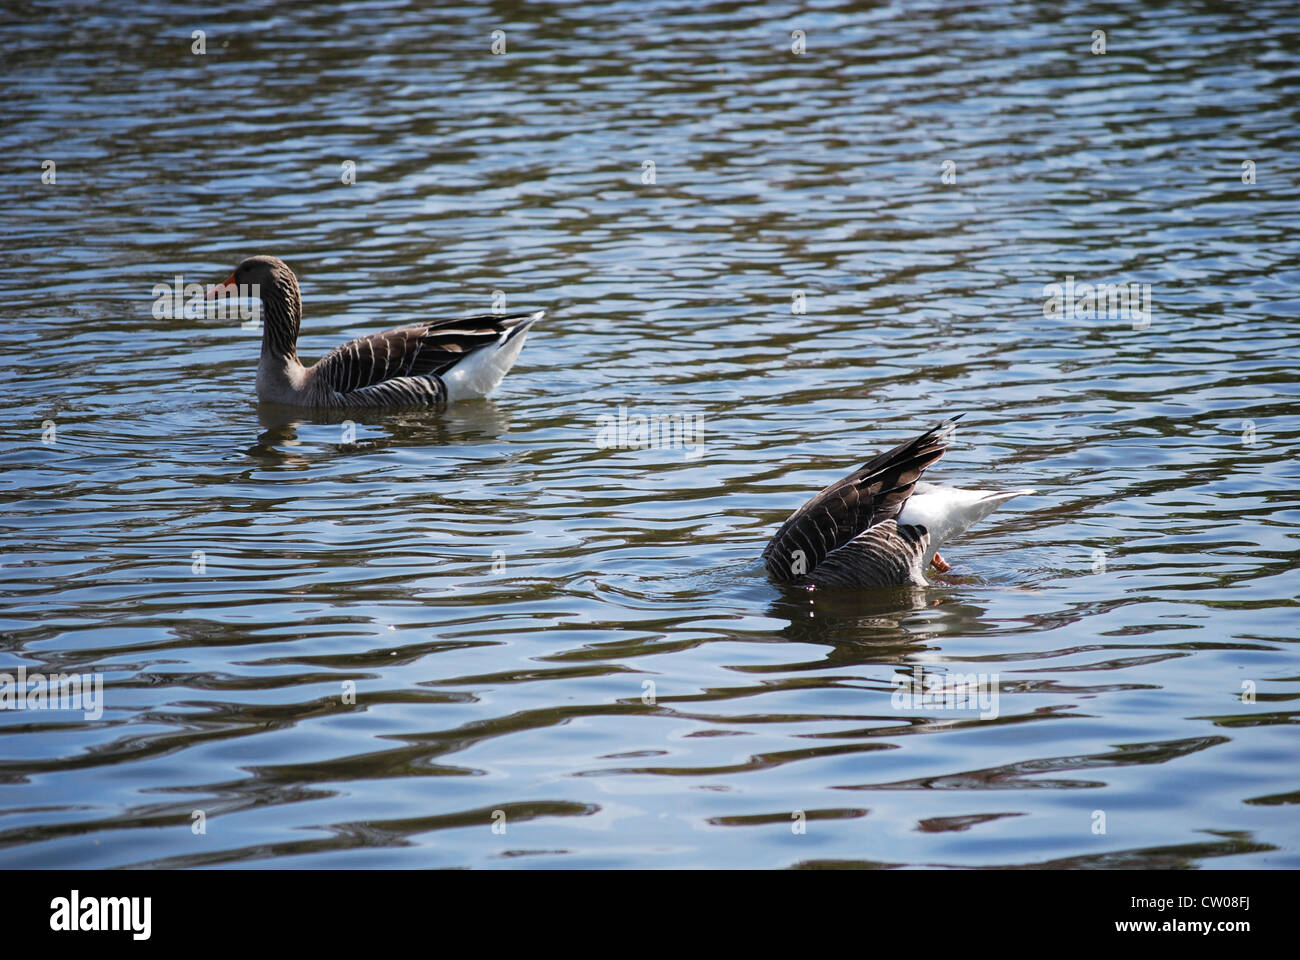 Ducks in a Pond. Stock Photo